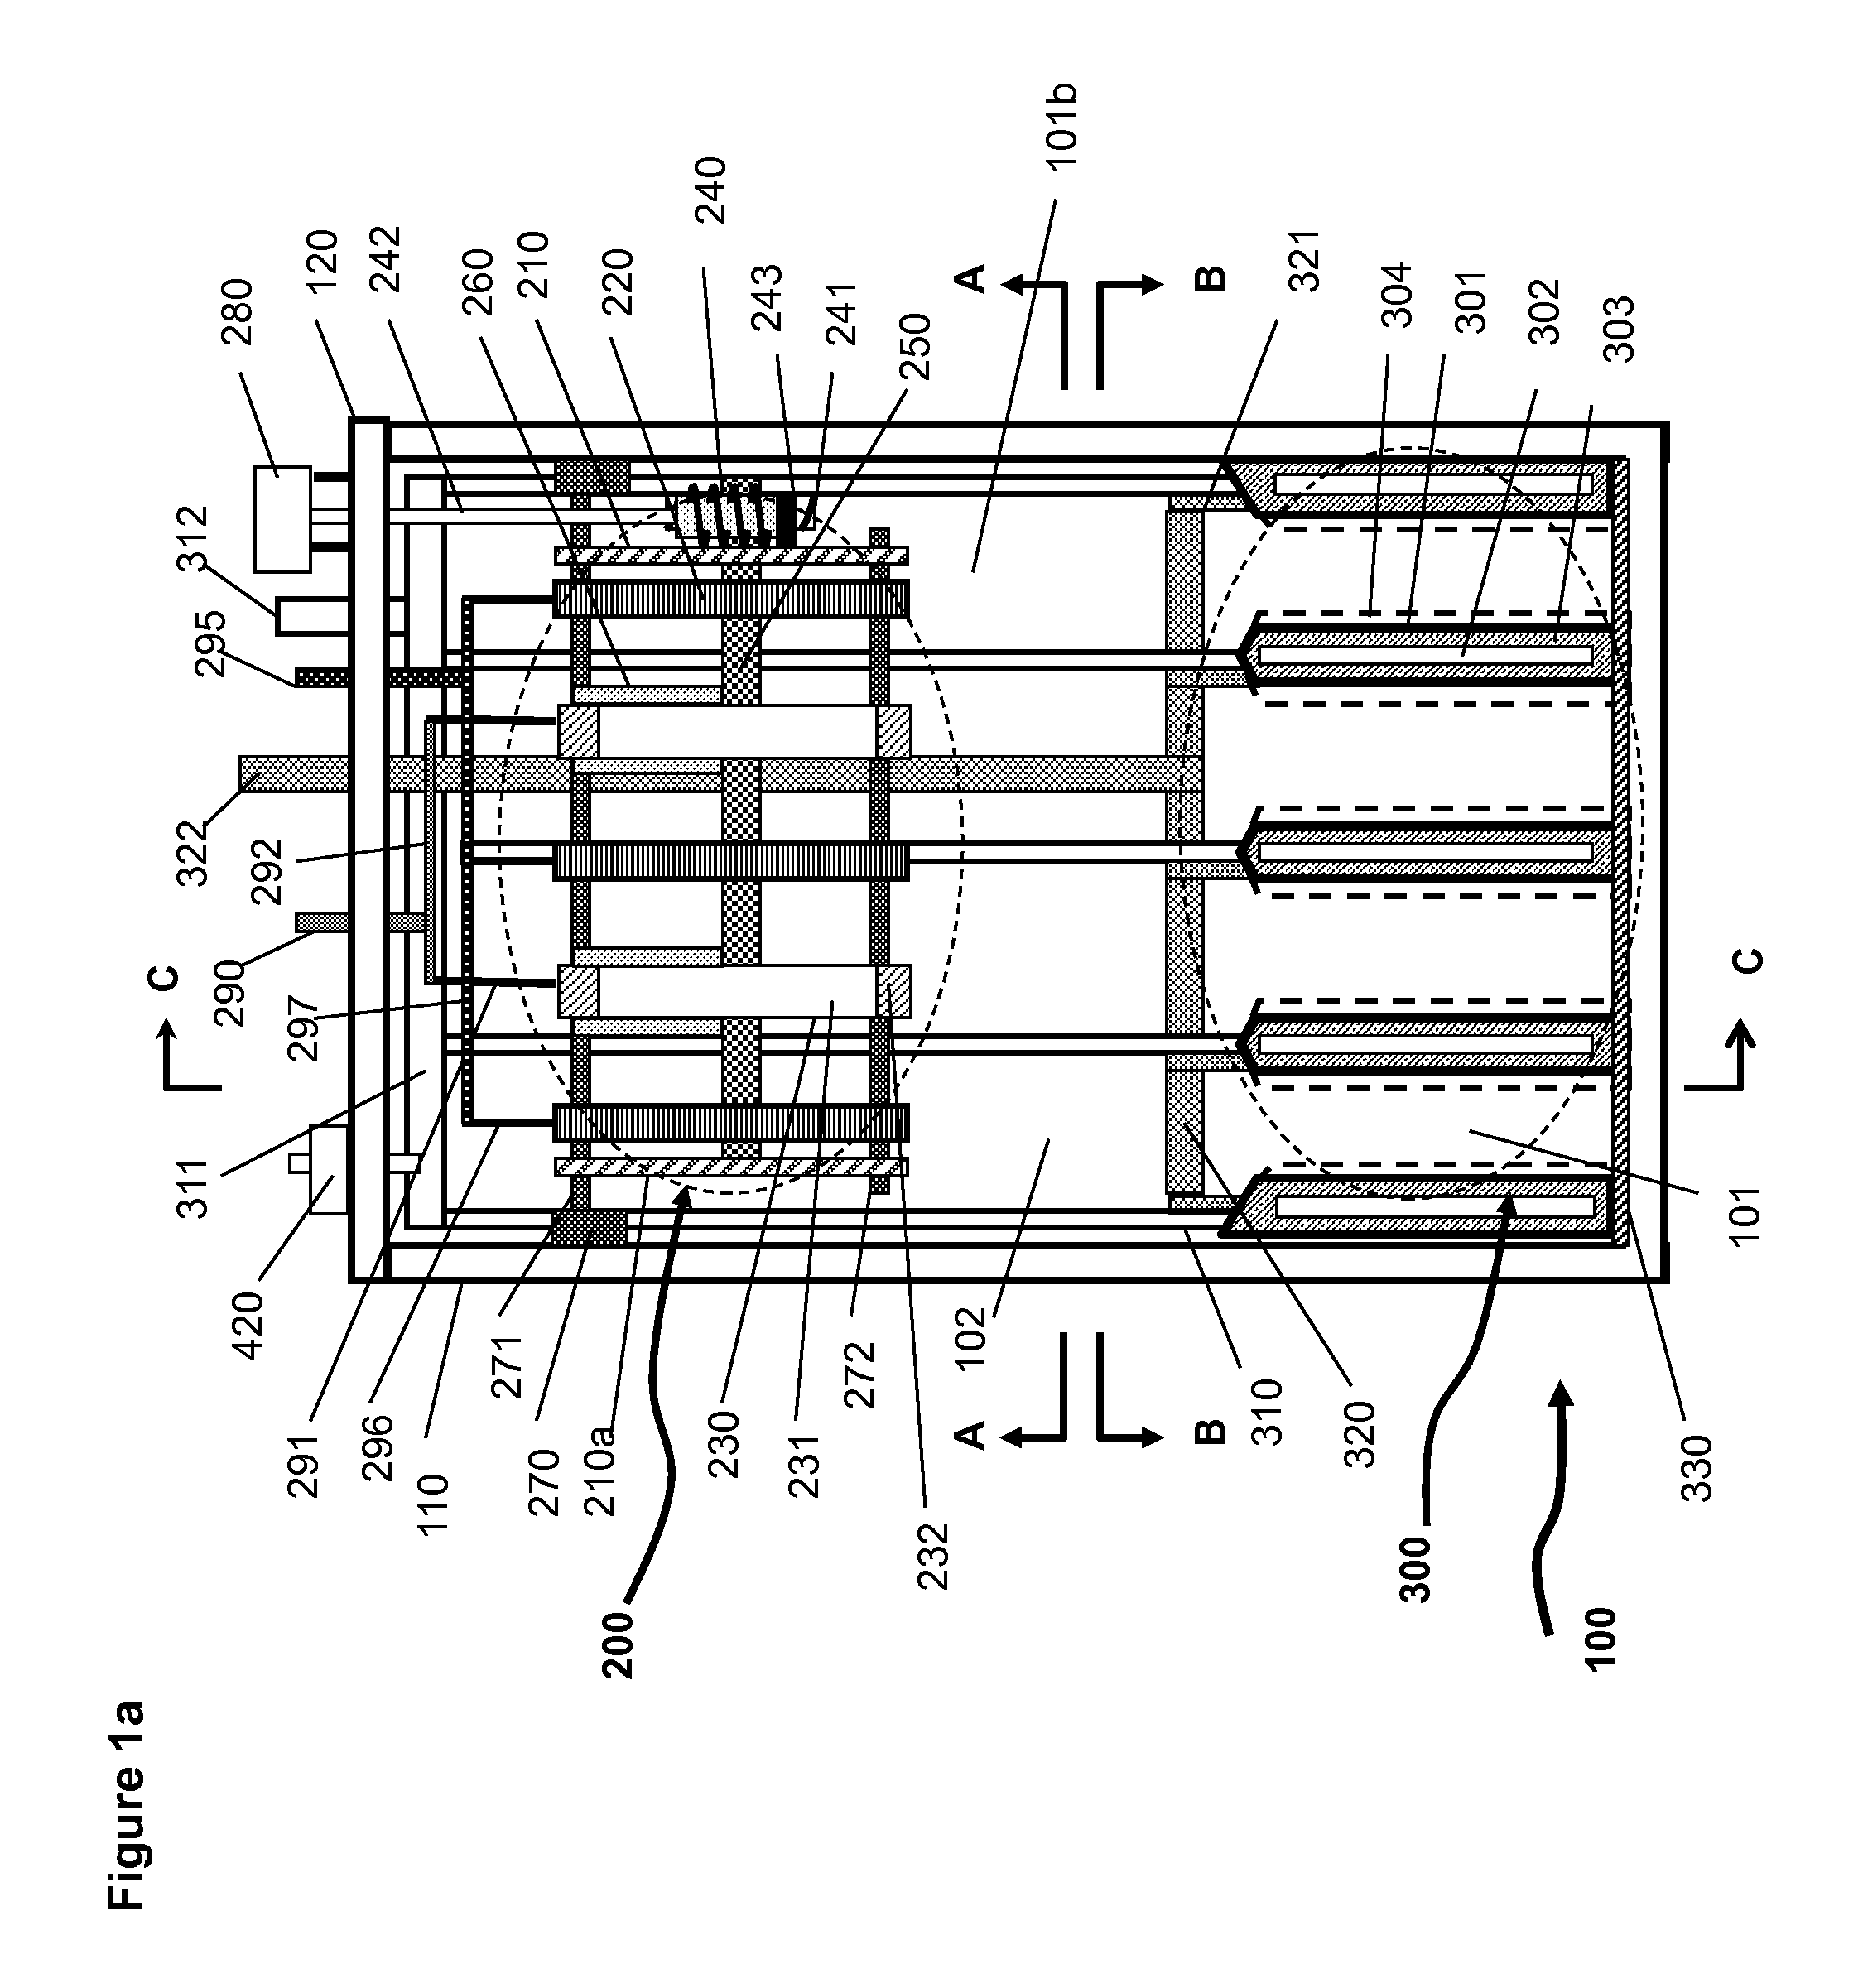 Electrochemical system for storing electricity in metals